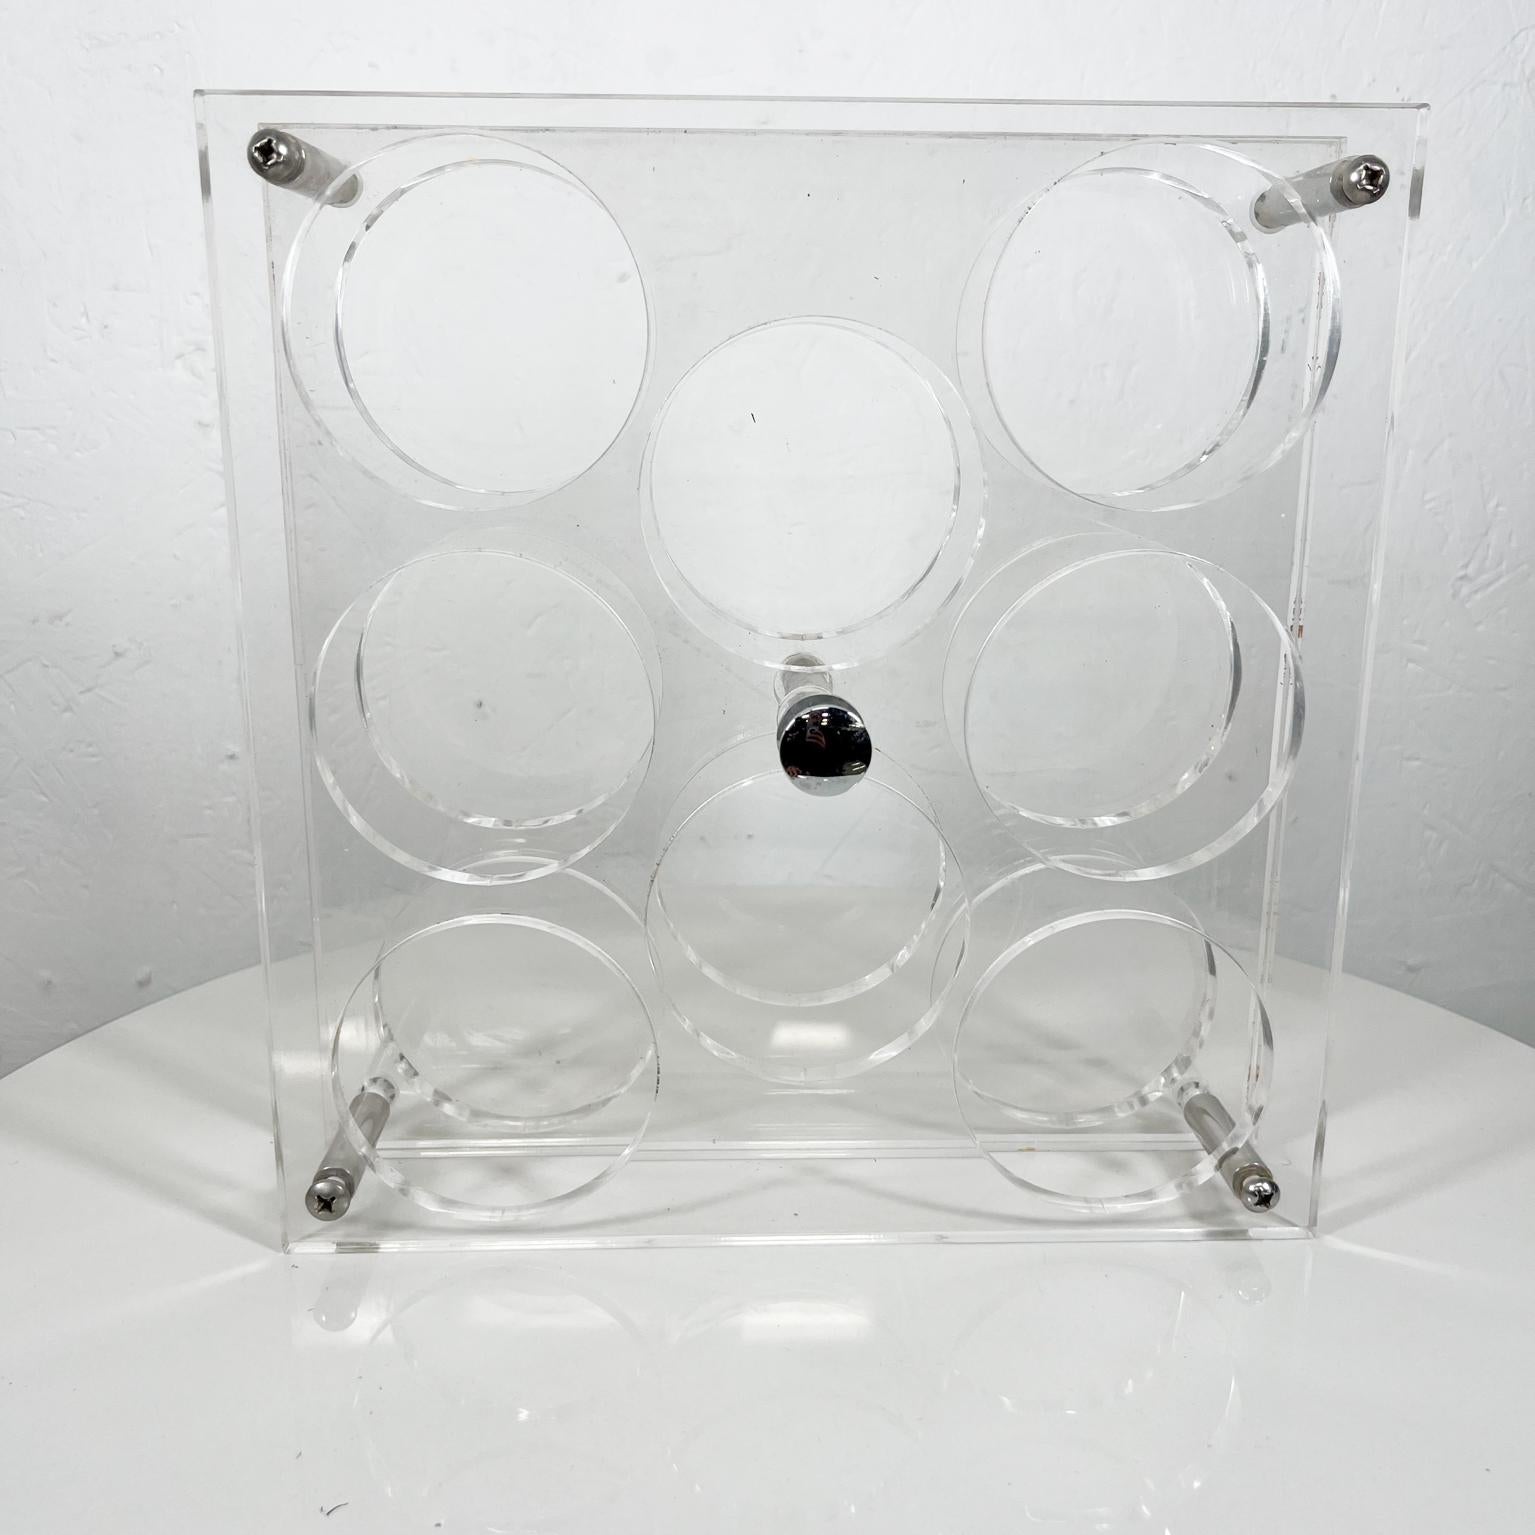 1970s Modernist Lucite Beverage Bar Drink Carrier Eight Glass Serving Tray 1